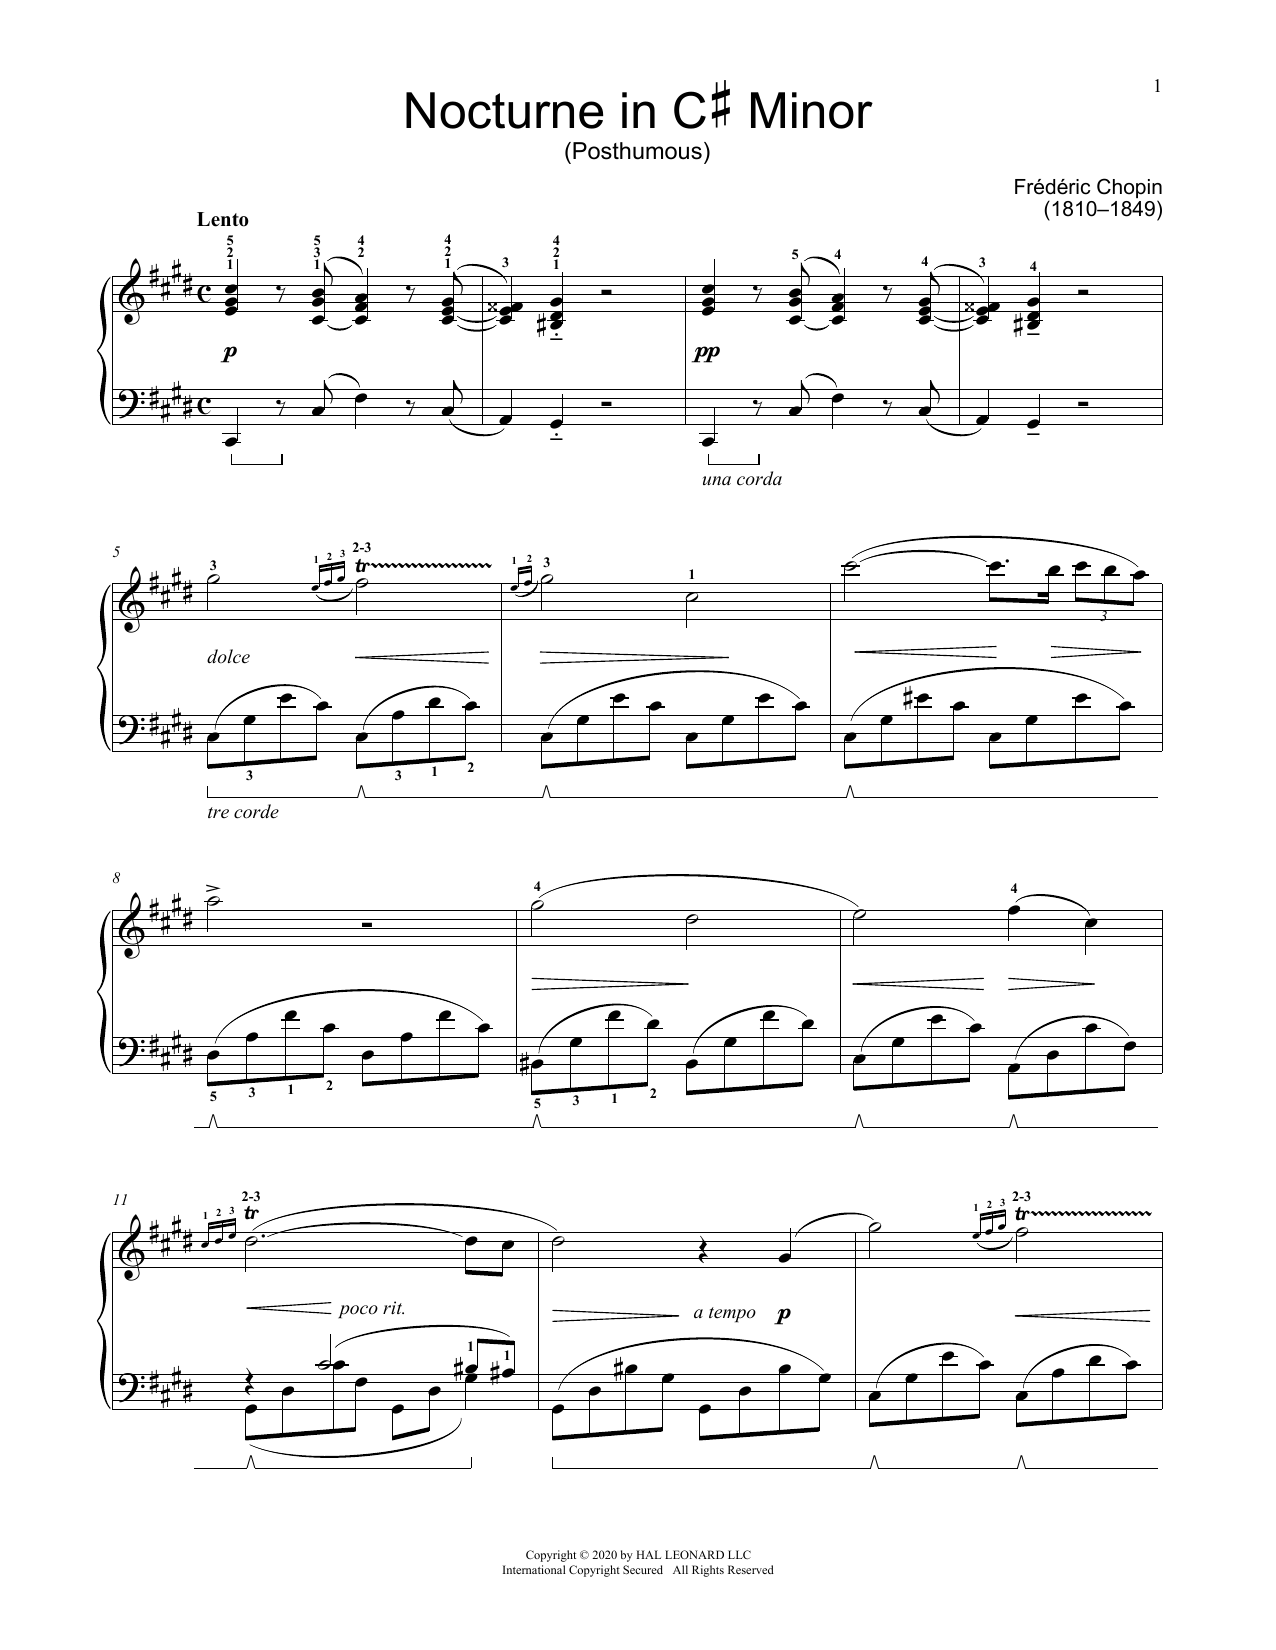 Download Frederic Chopin Nocturne In C-Sharp Minor, KK. Anh. Ia, Sheet Music